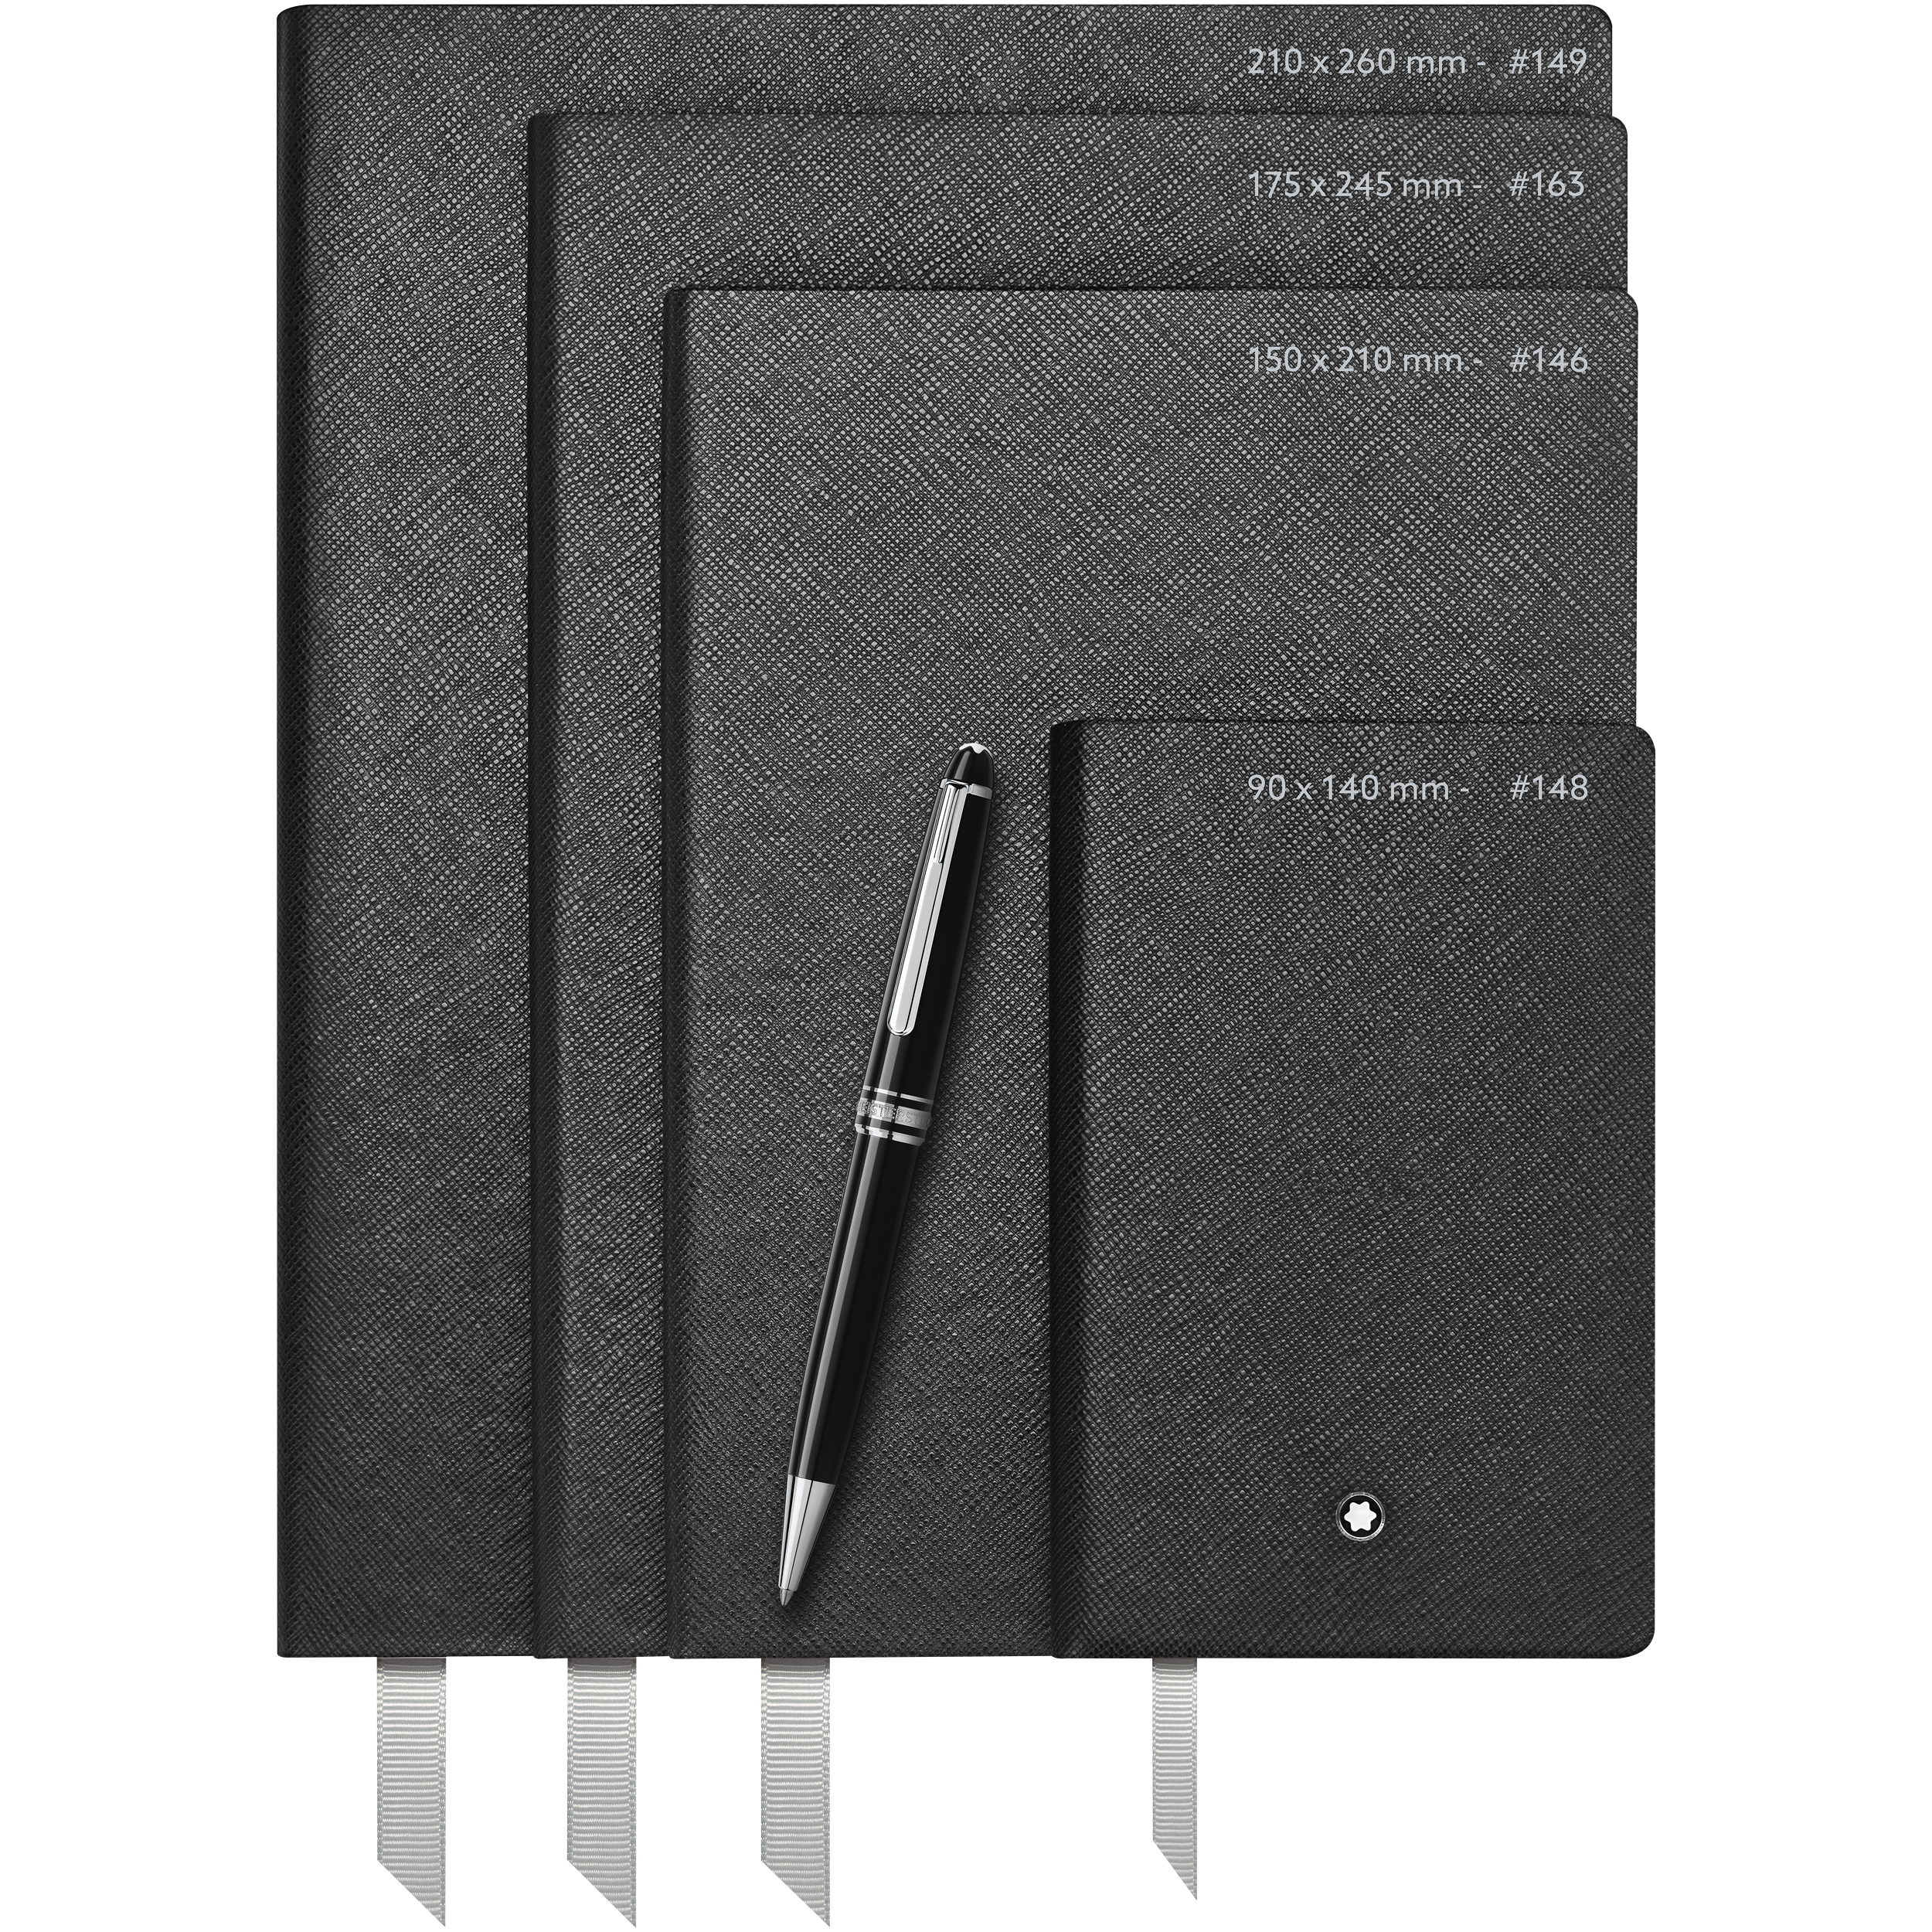 2 Montblanc Fine Stationery Notebooks #149 Slim, black, lined for Augmented Paper +, image 2